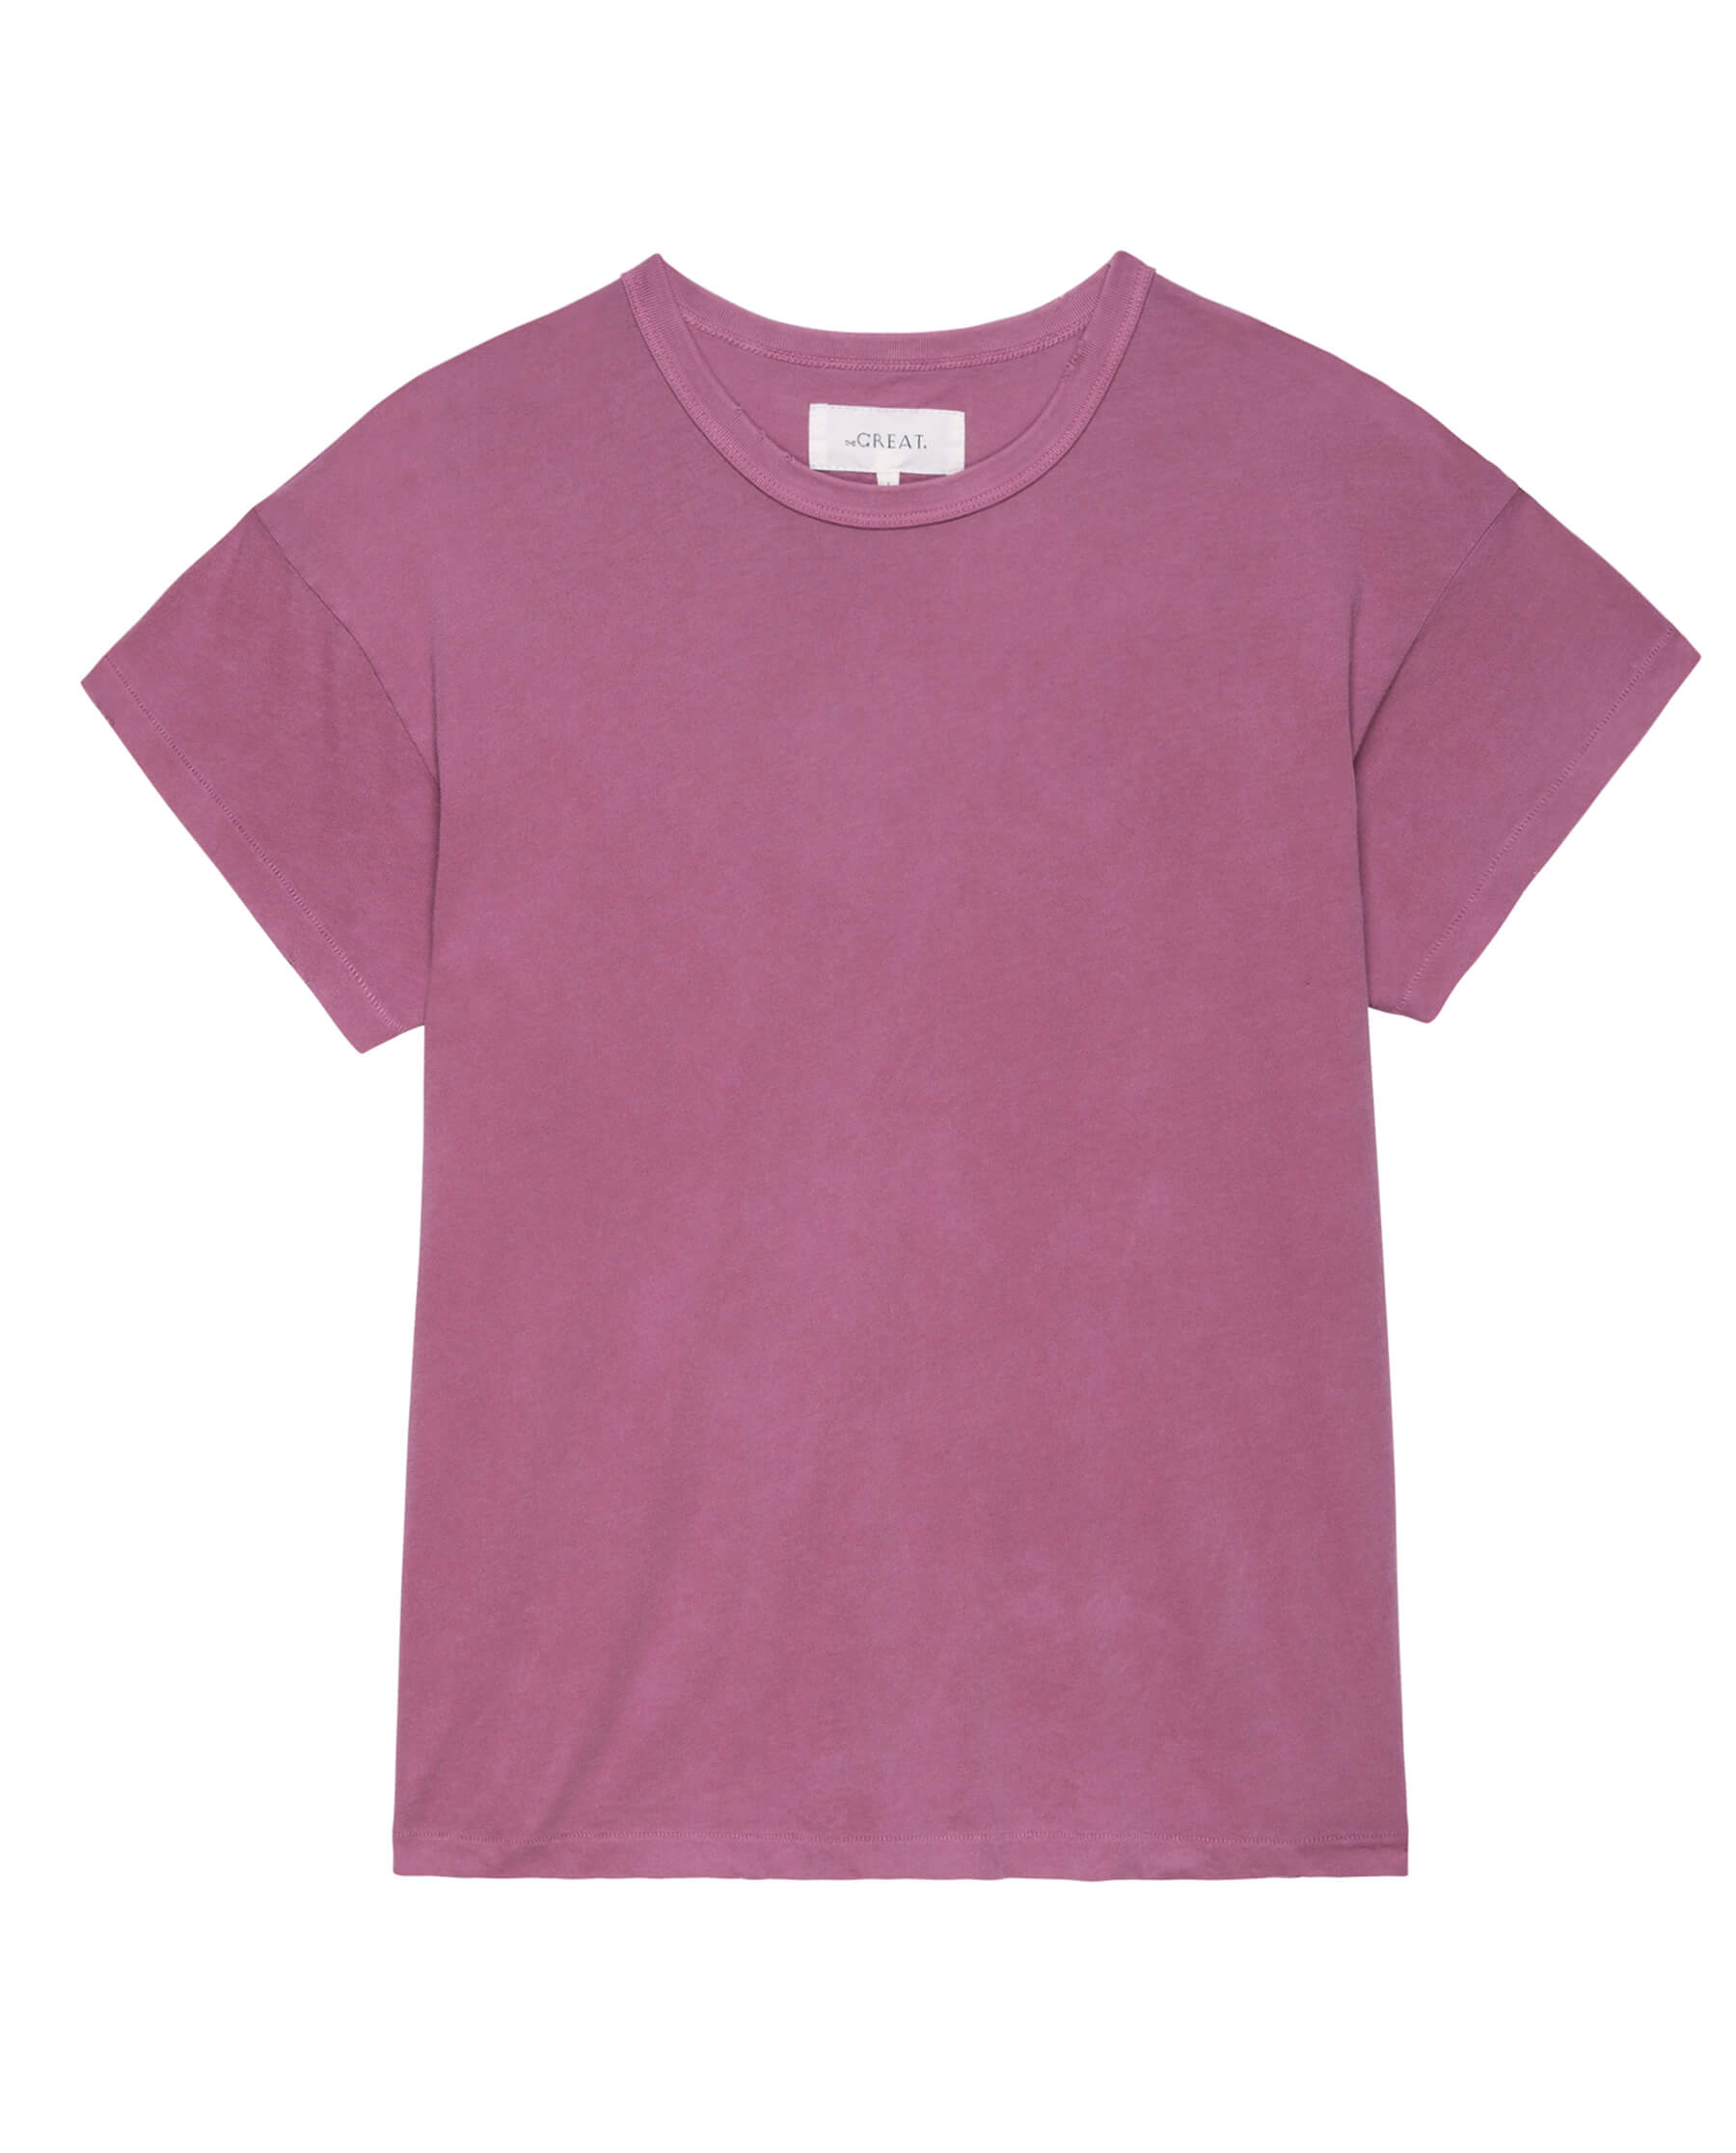 The Boxy Crew. Solid -- Aubergine TEES THE GREAT. SP24 KNITS